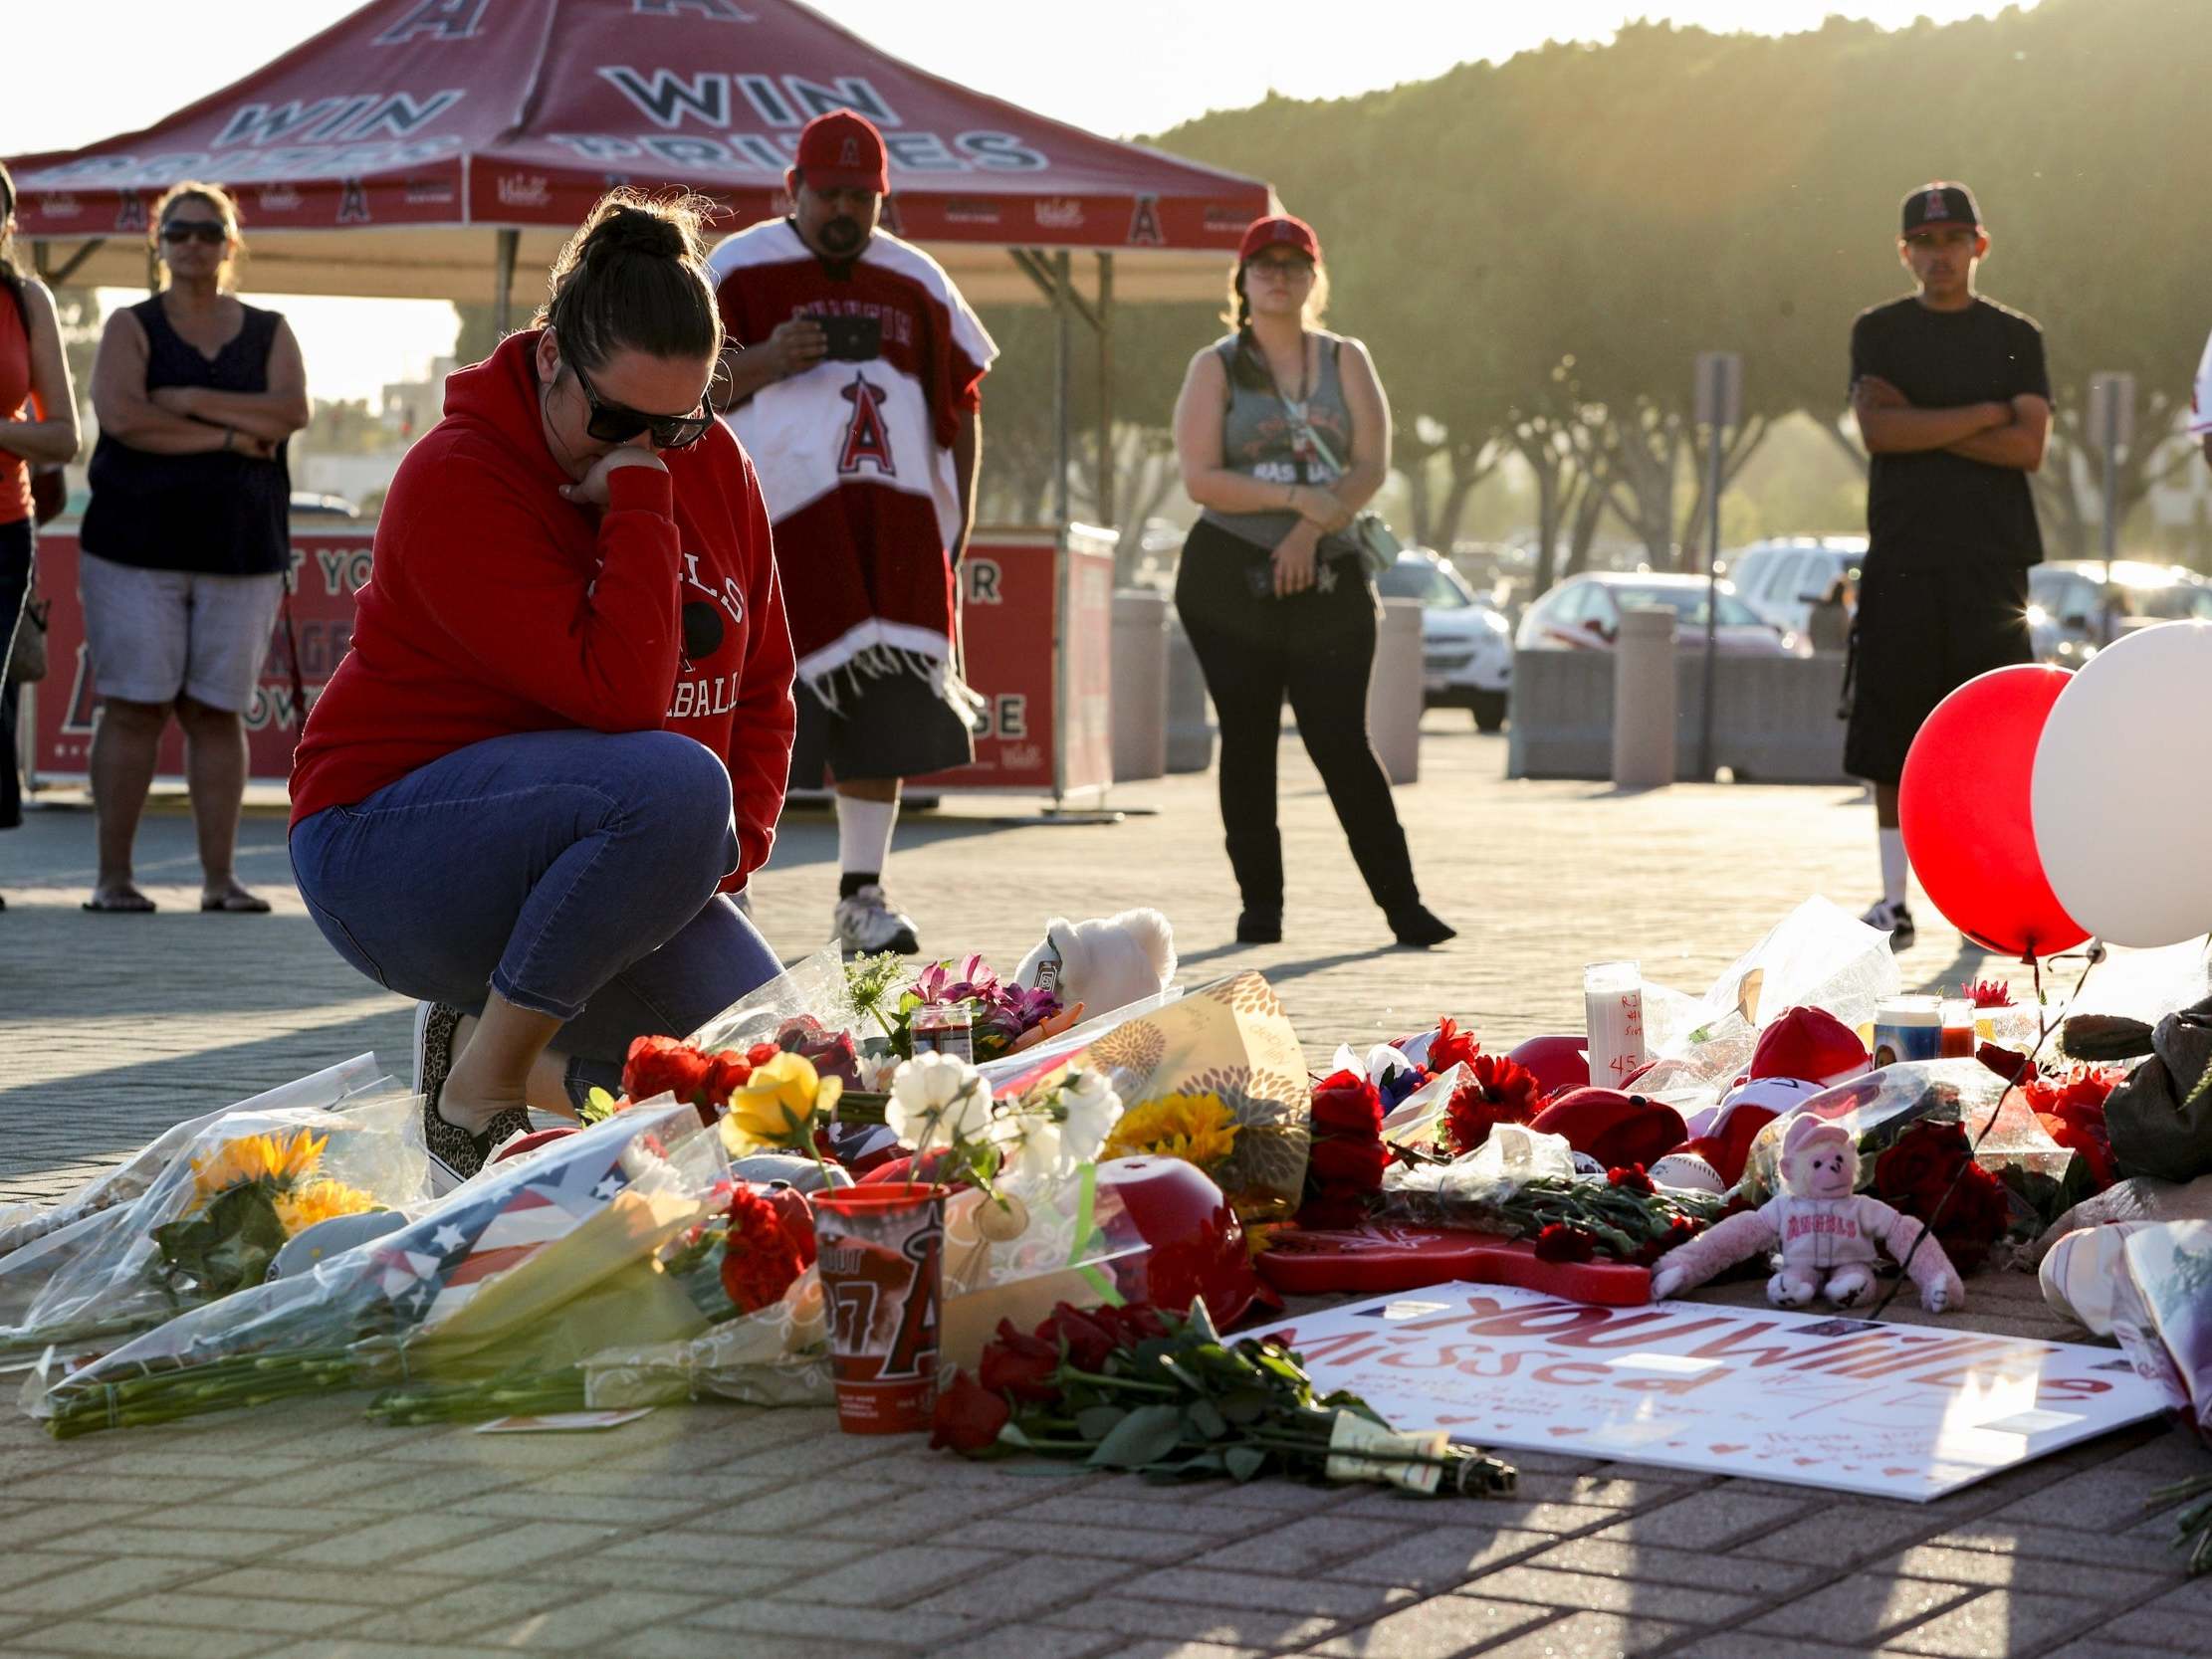 Tyler Skaggs dead: Police refuse to confirm cause of death of LA